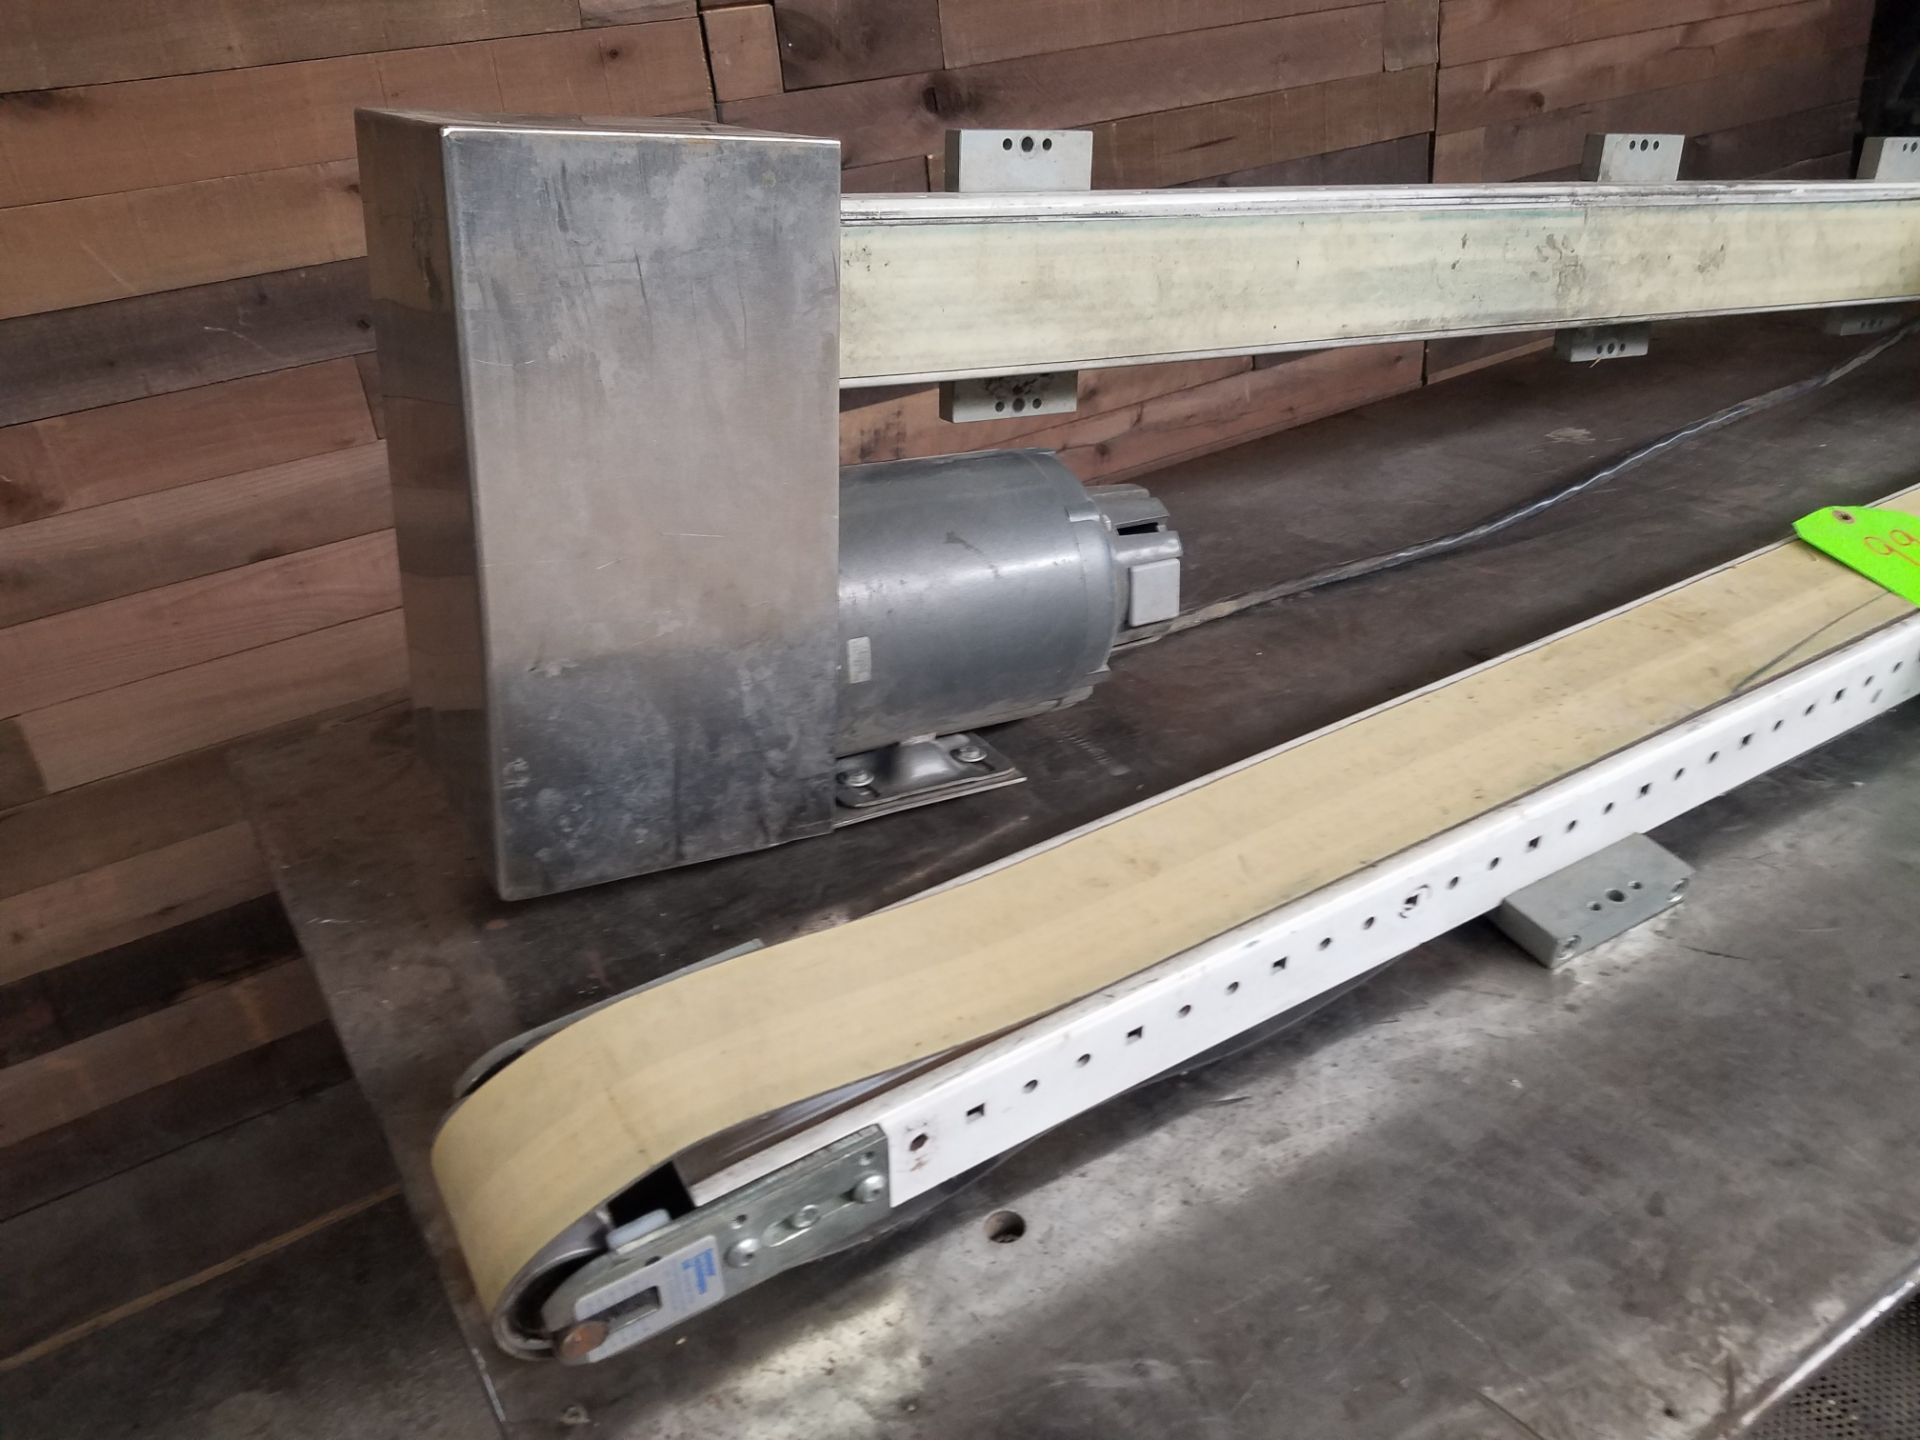 (2) Aprox. 3-1/8" Wide x 72" Long Belt Conveyors (Rigging, Loading & Site Management Fee $50.00 - Image 2 of 5